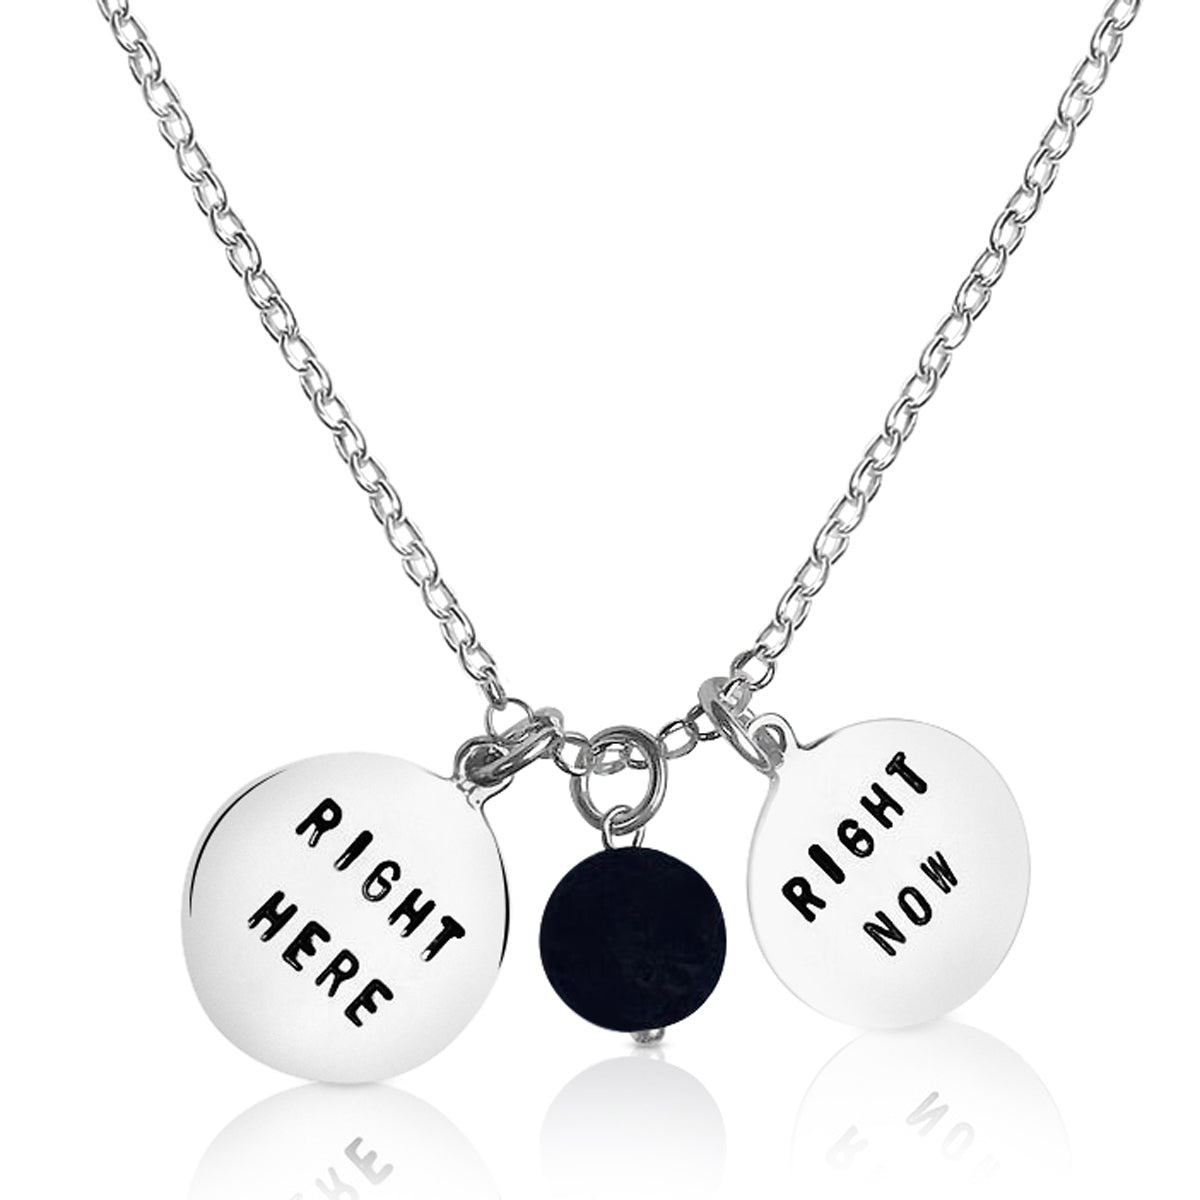 Right Here - Right Now - Inspirational Necklace